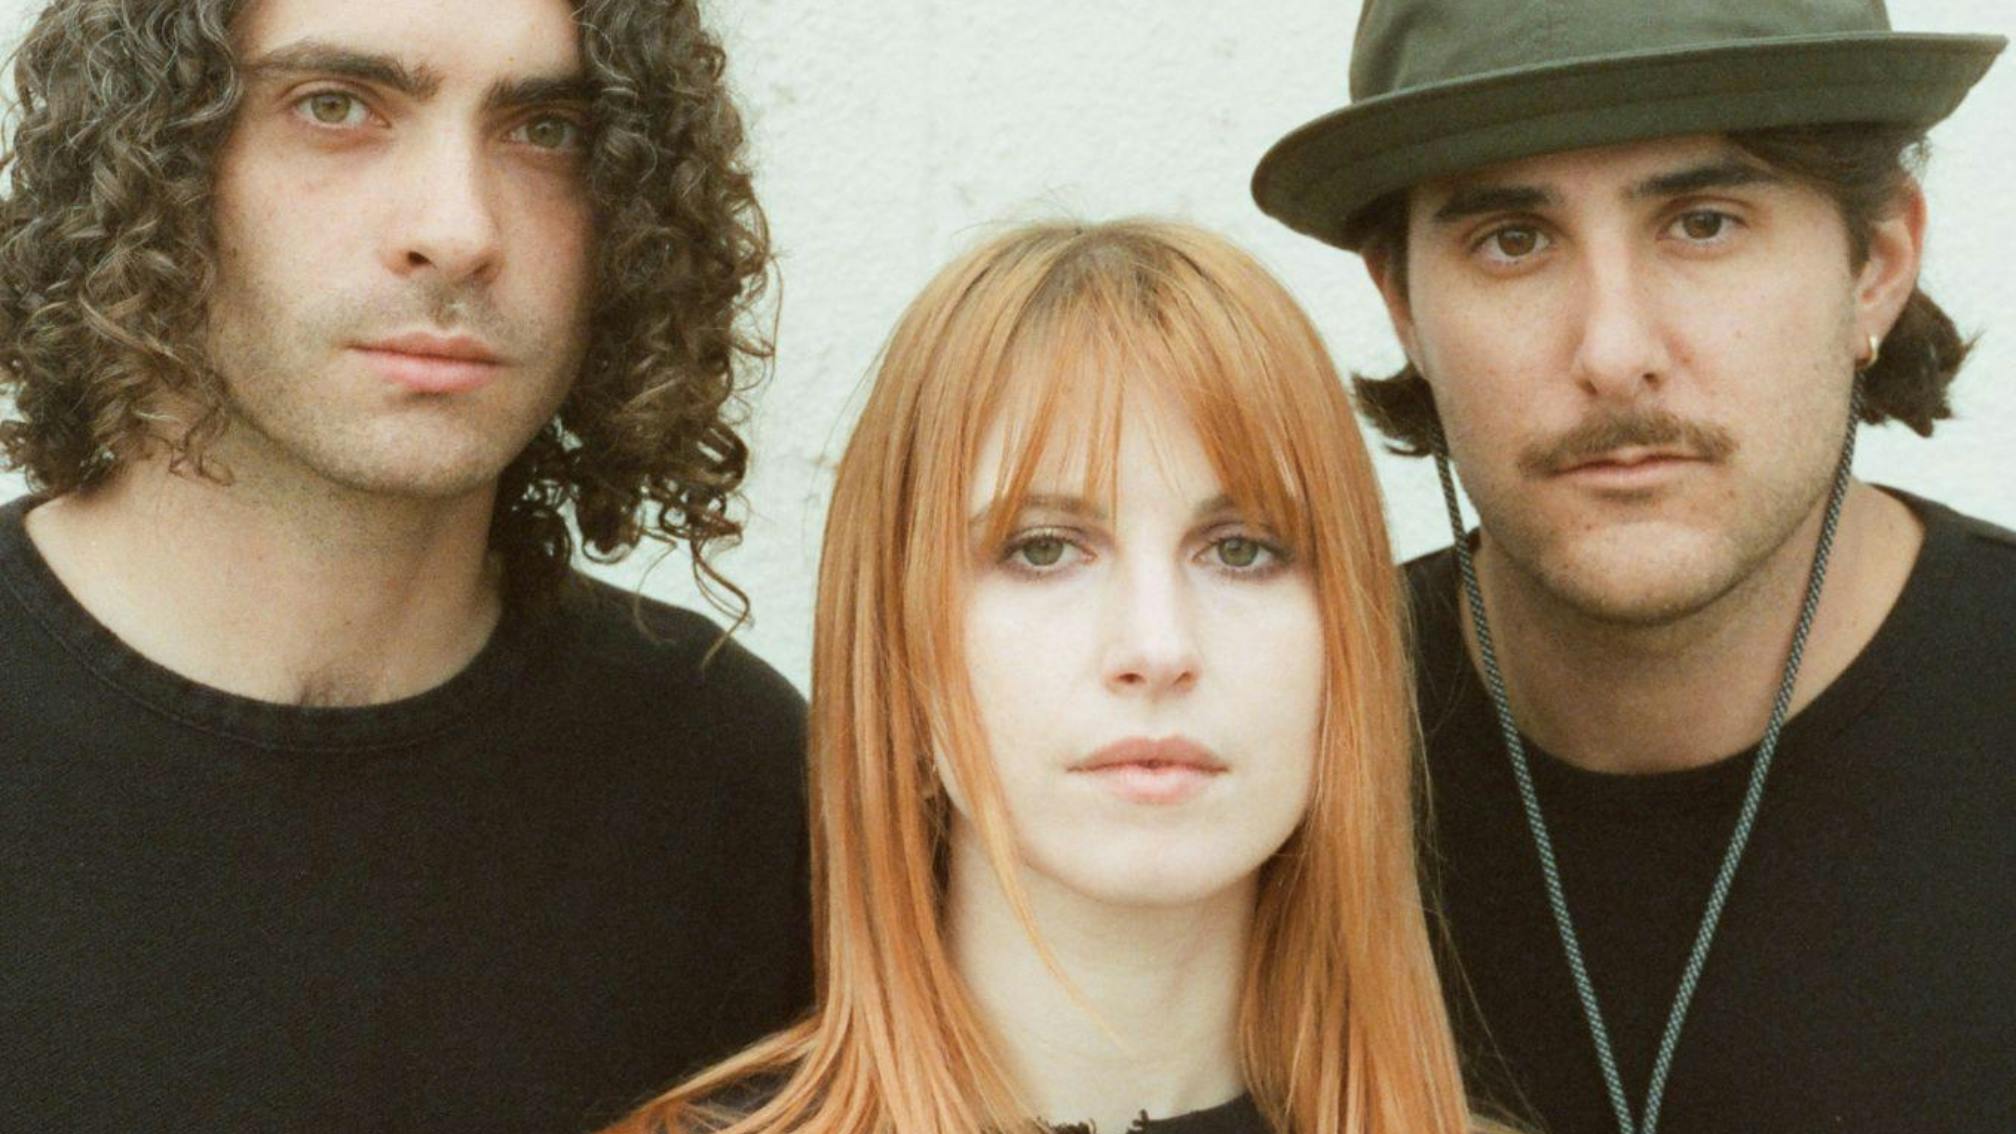 Paramore are up to something, and fans are freaking out